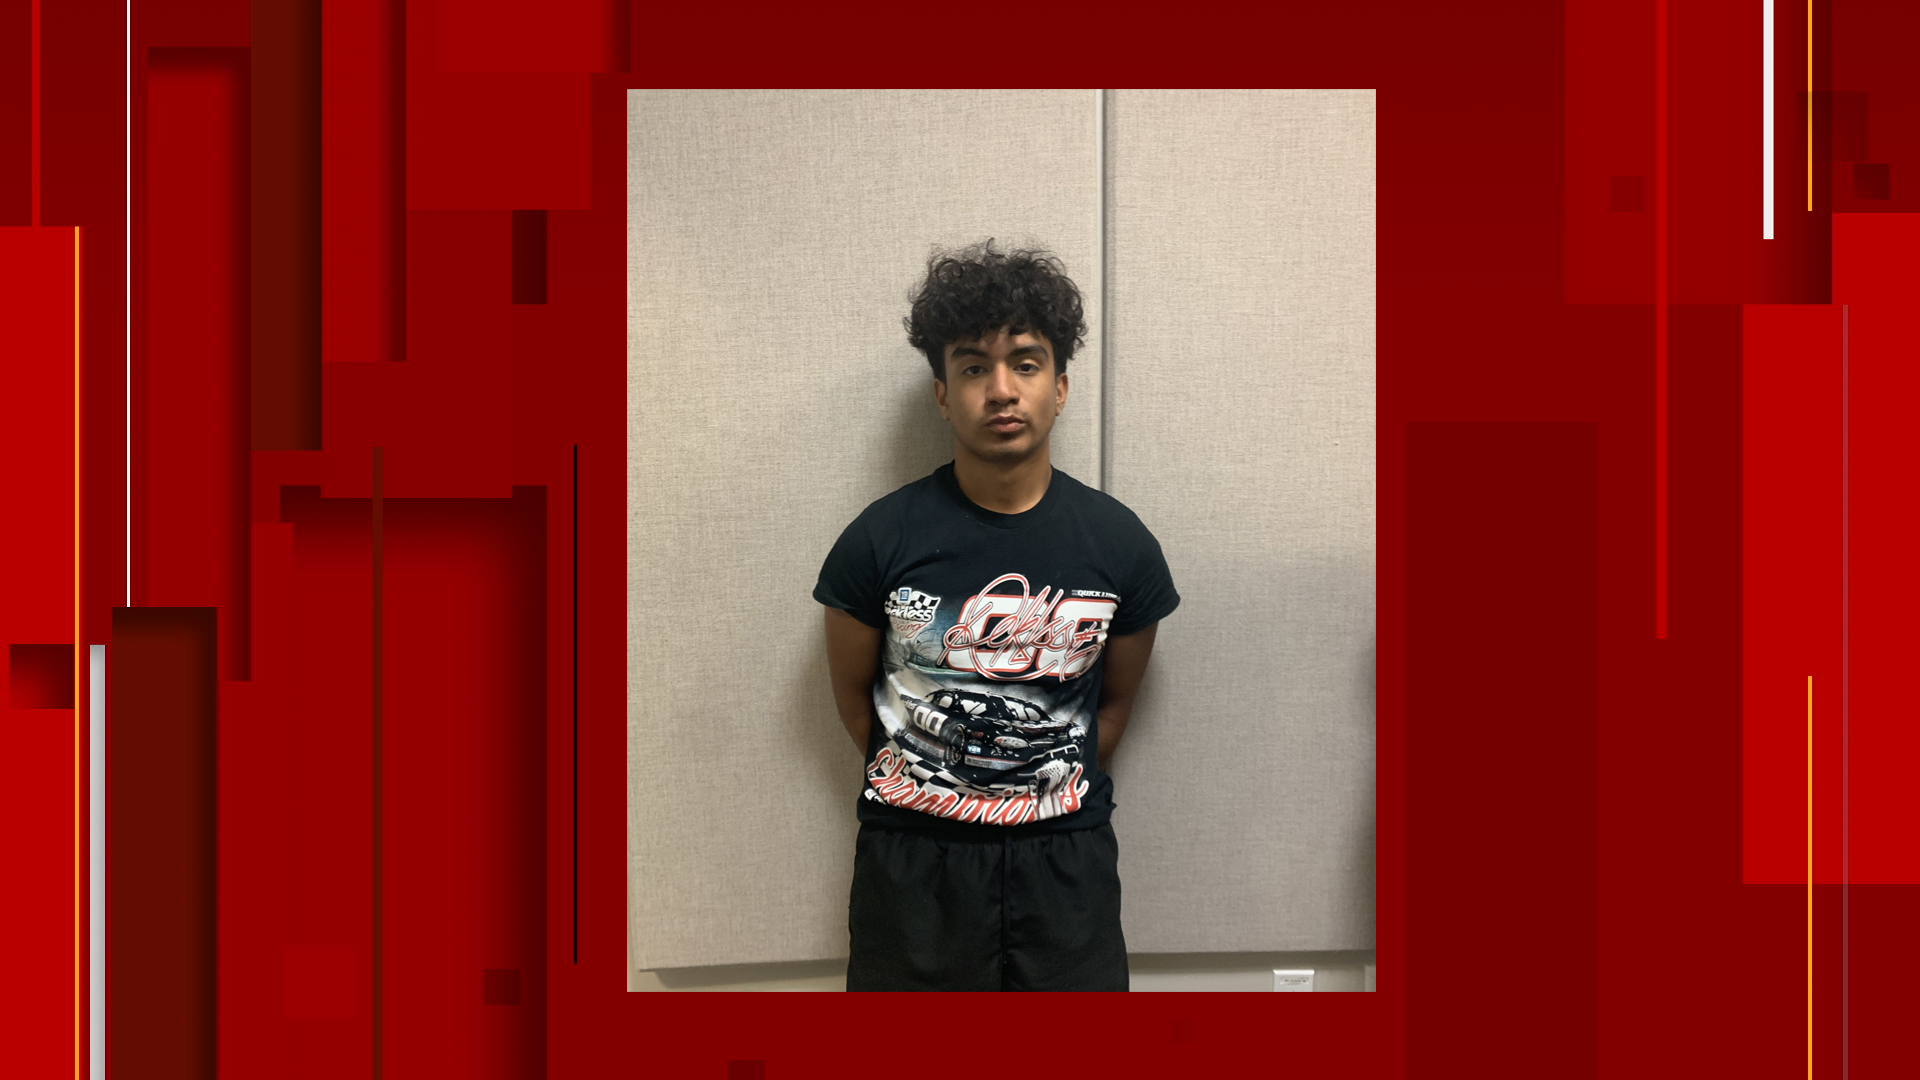 Cohta Lrka Or Young Lrki Xxx Vido - Man, 18, arrested for child pornography, sex assault of a 14-year-old girl,  BCSO says